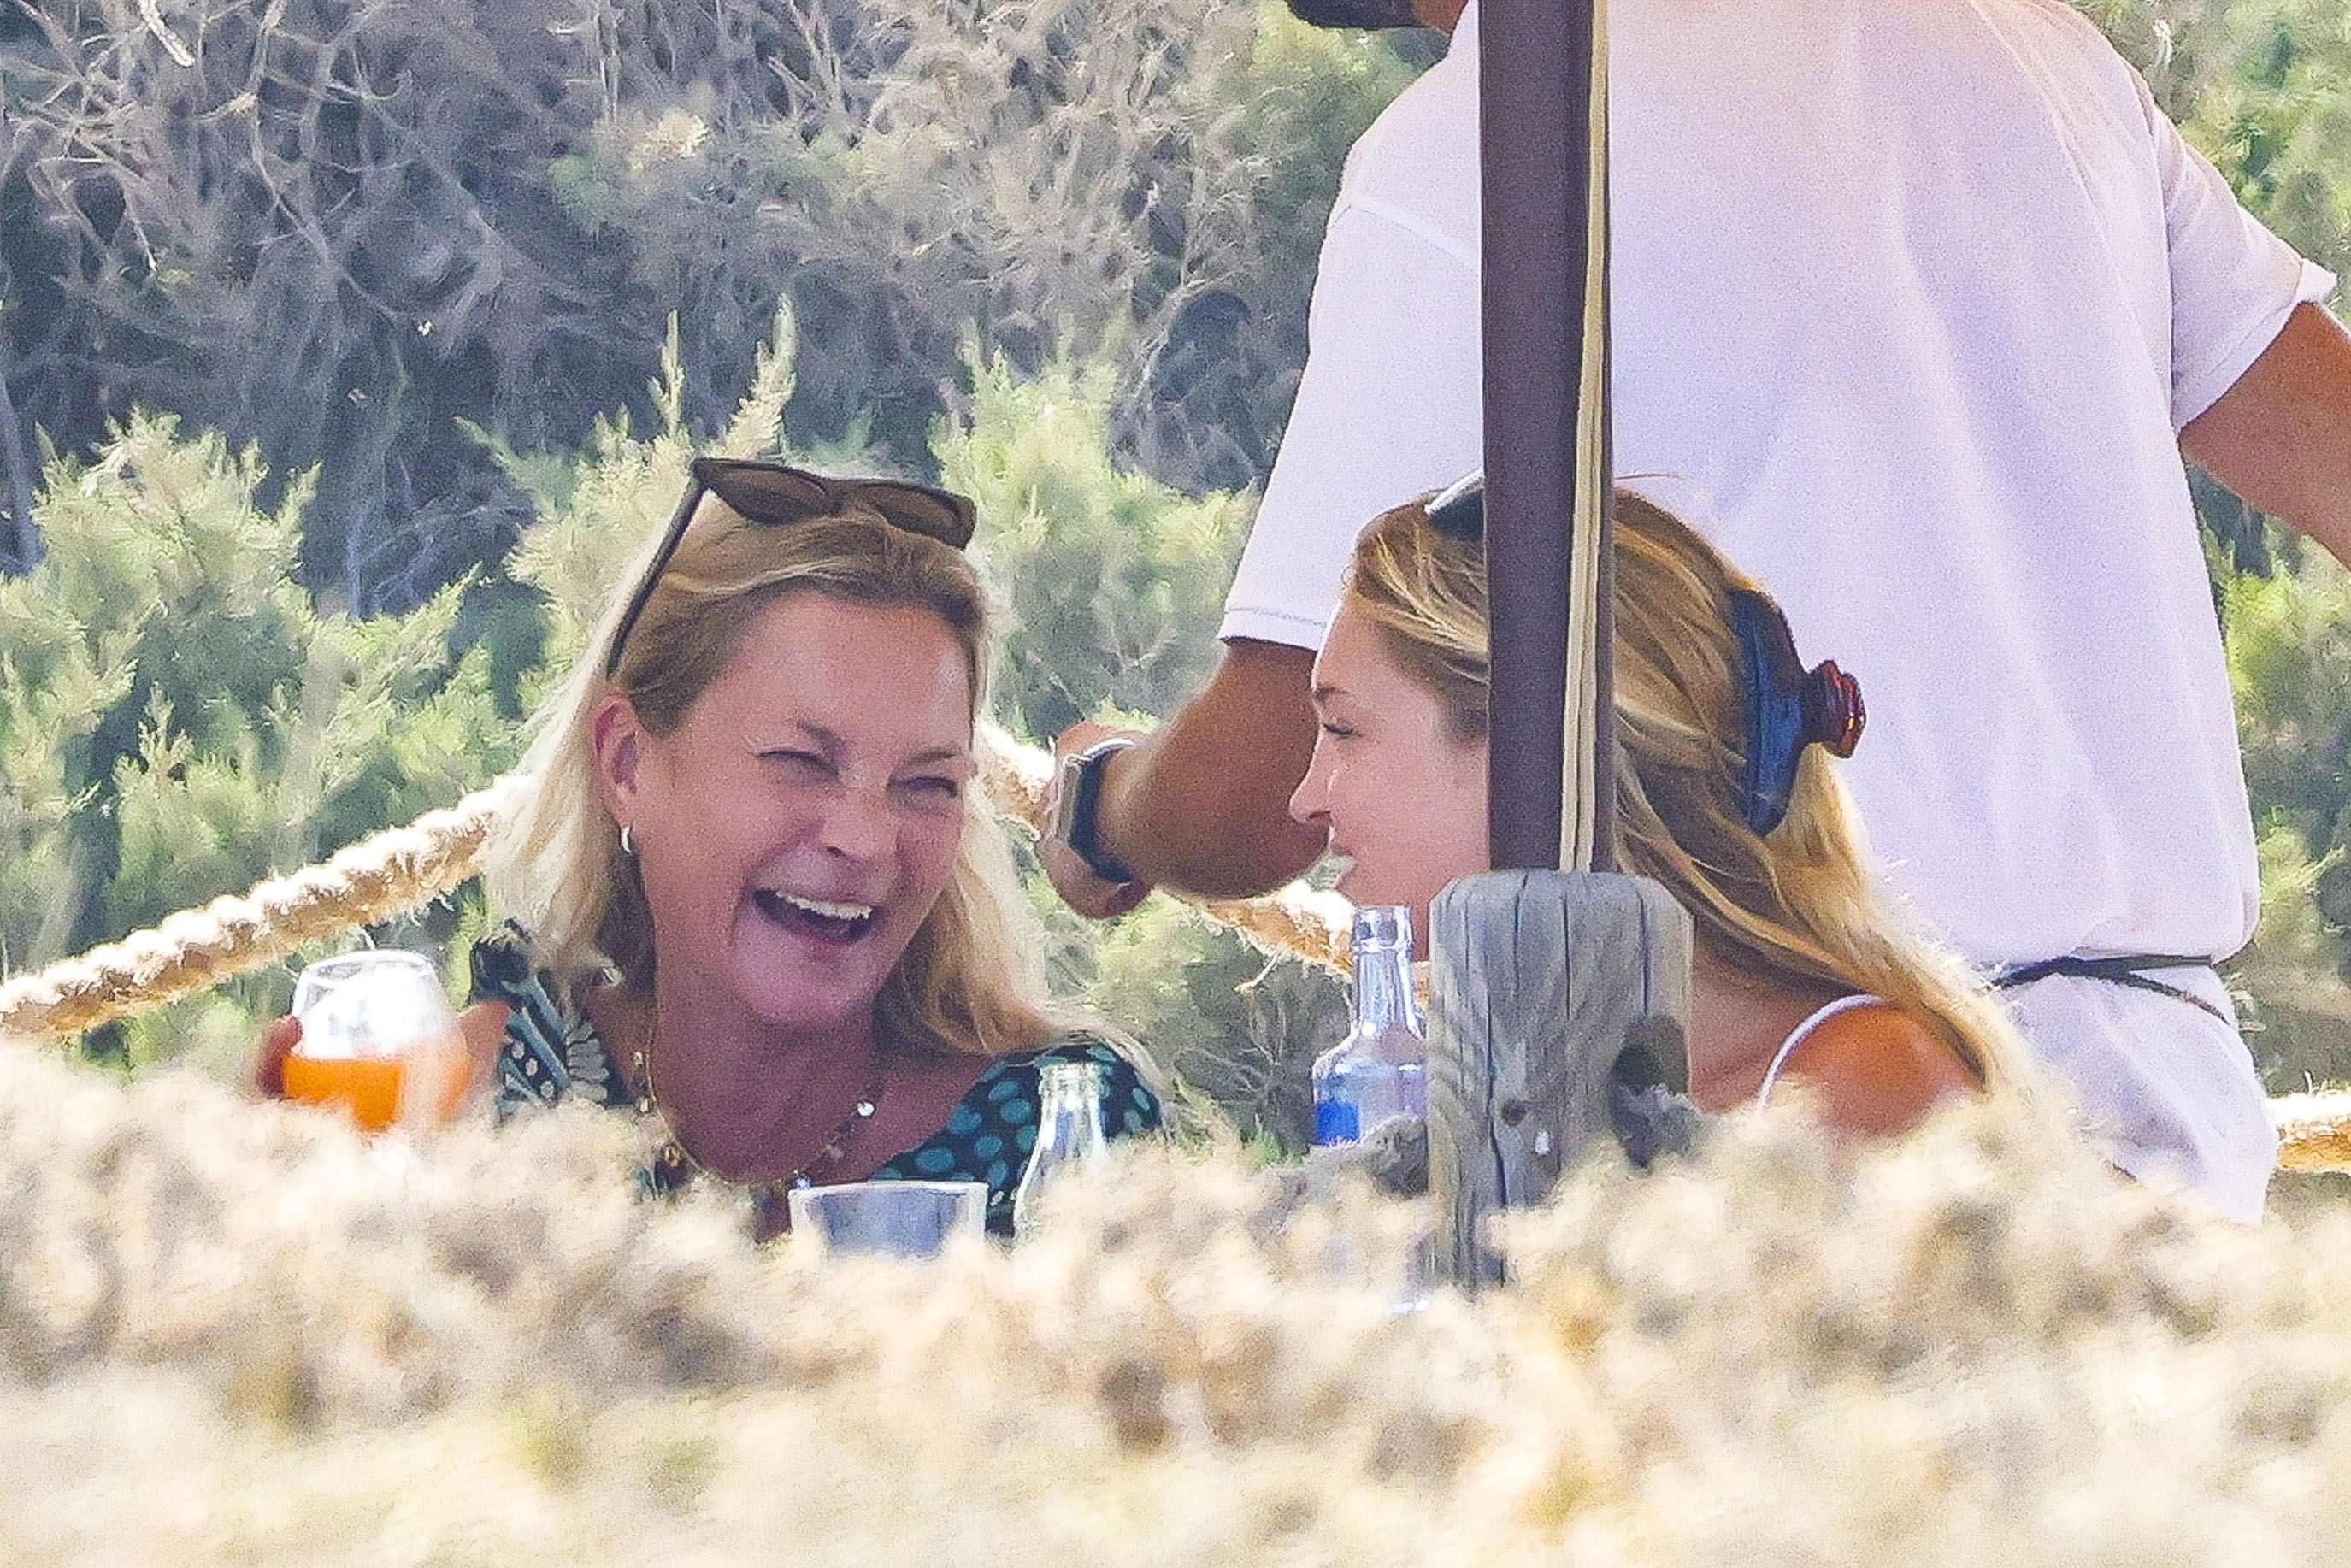 Kate was seen having a blast with Lila